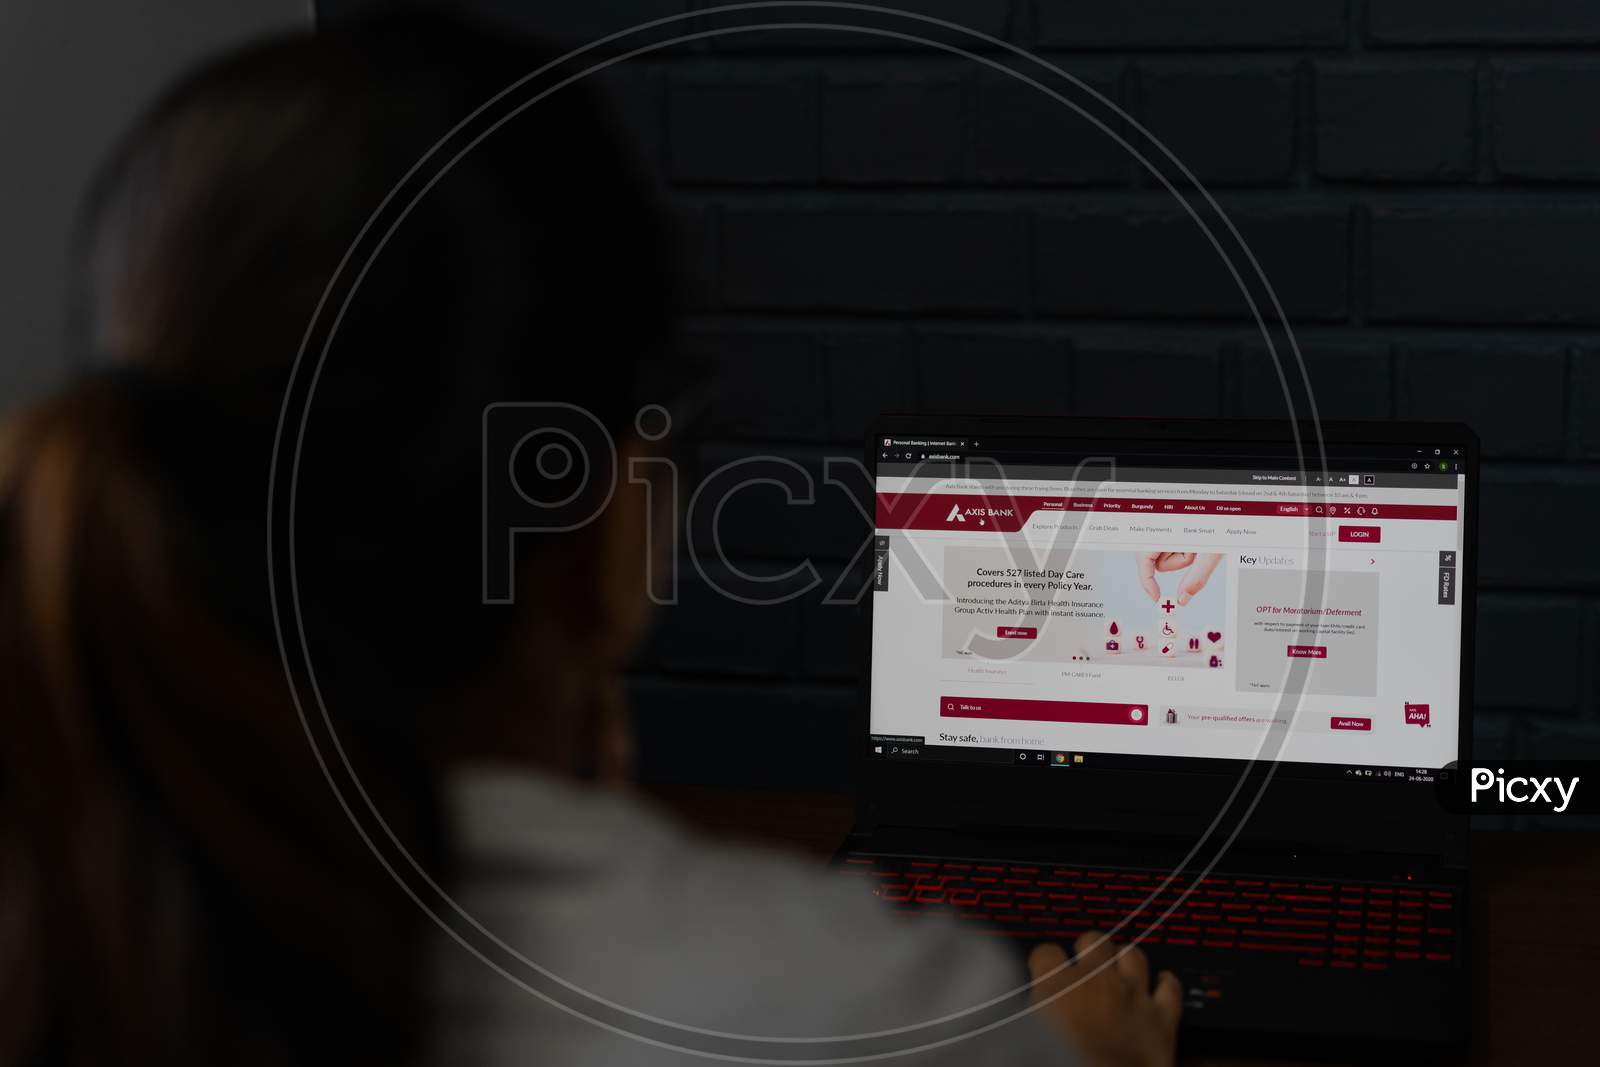 Woman checking Axis Bank home page on a laptop screen. Online banking service benefits from home